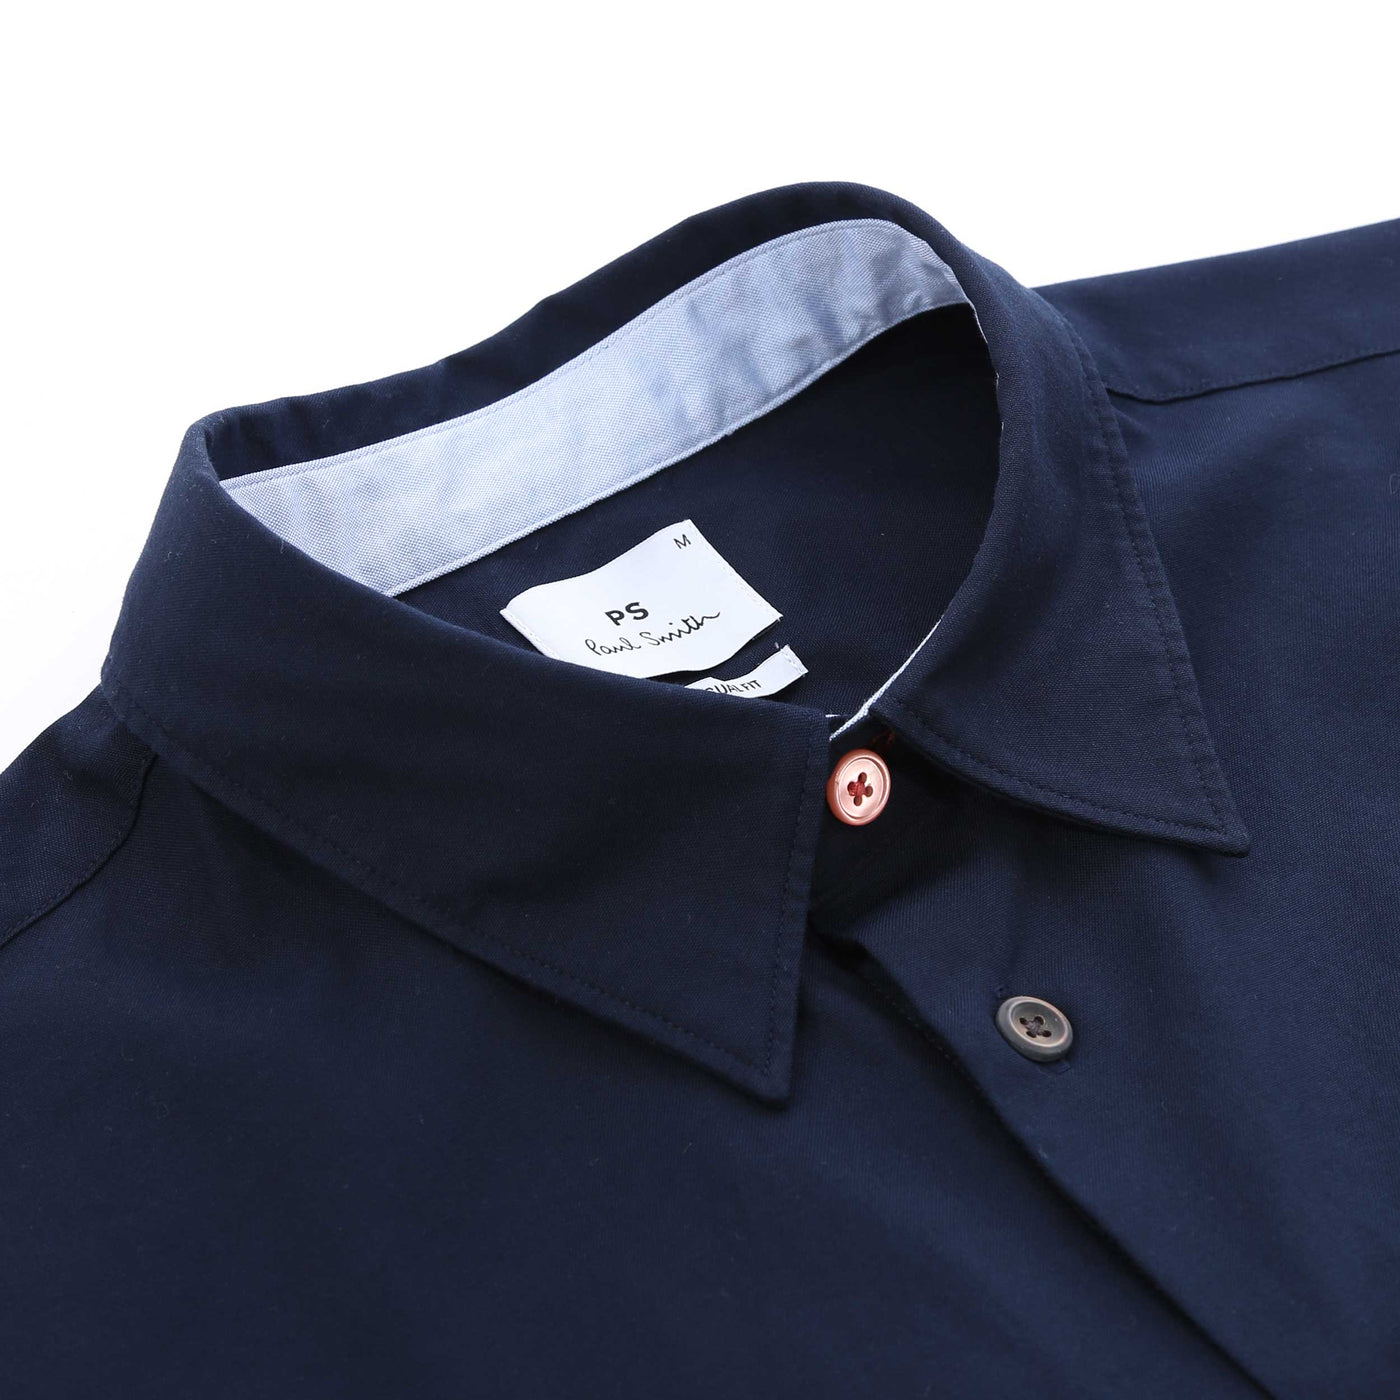 Paul Smith Casual Fit Zeb Badge SS Shirt in Navy Collar